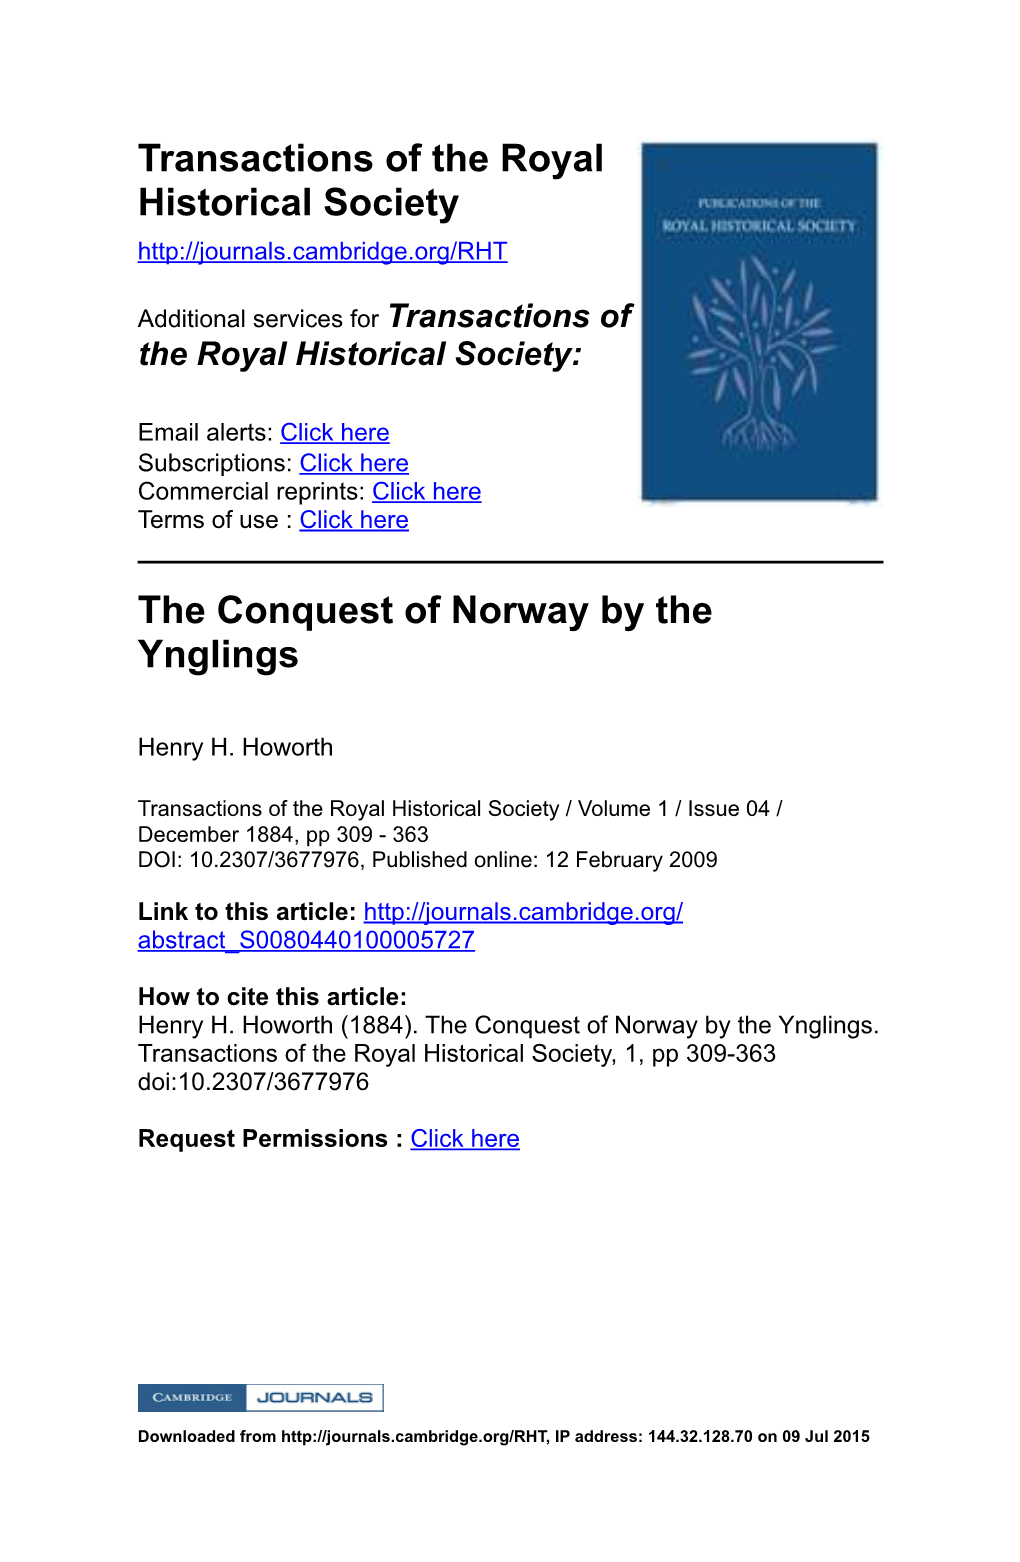 The Conquest of Norway by the Ynglings